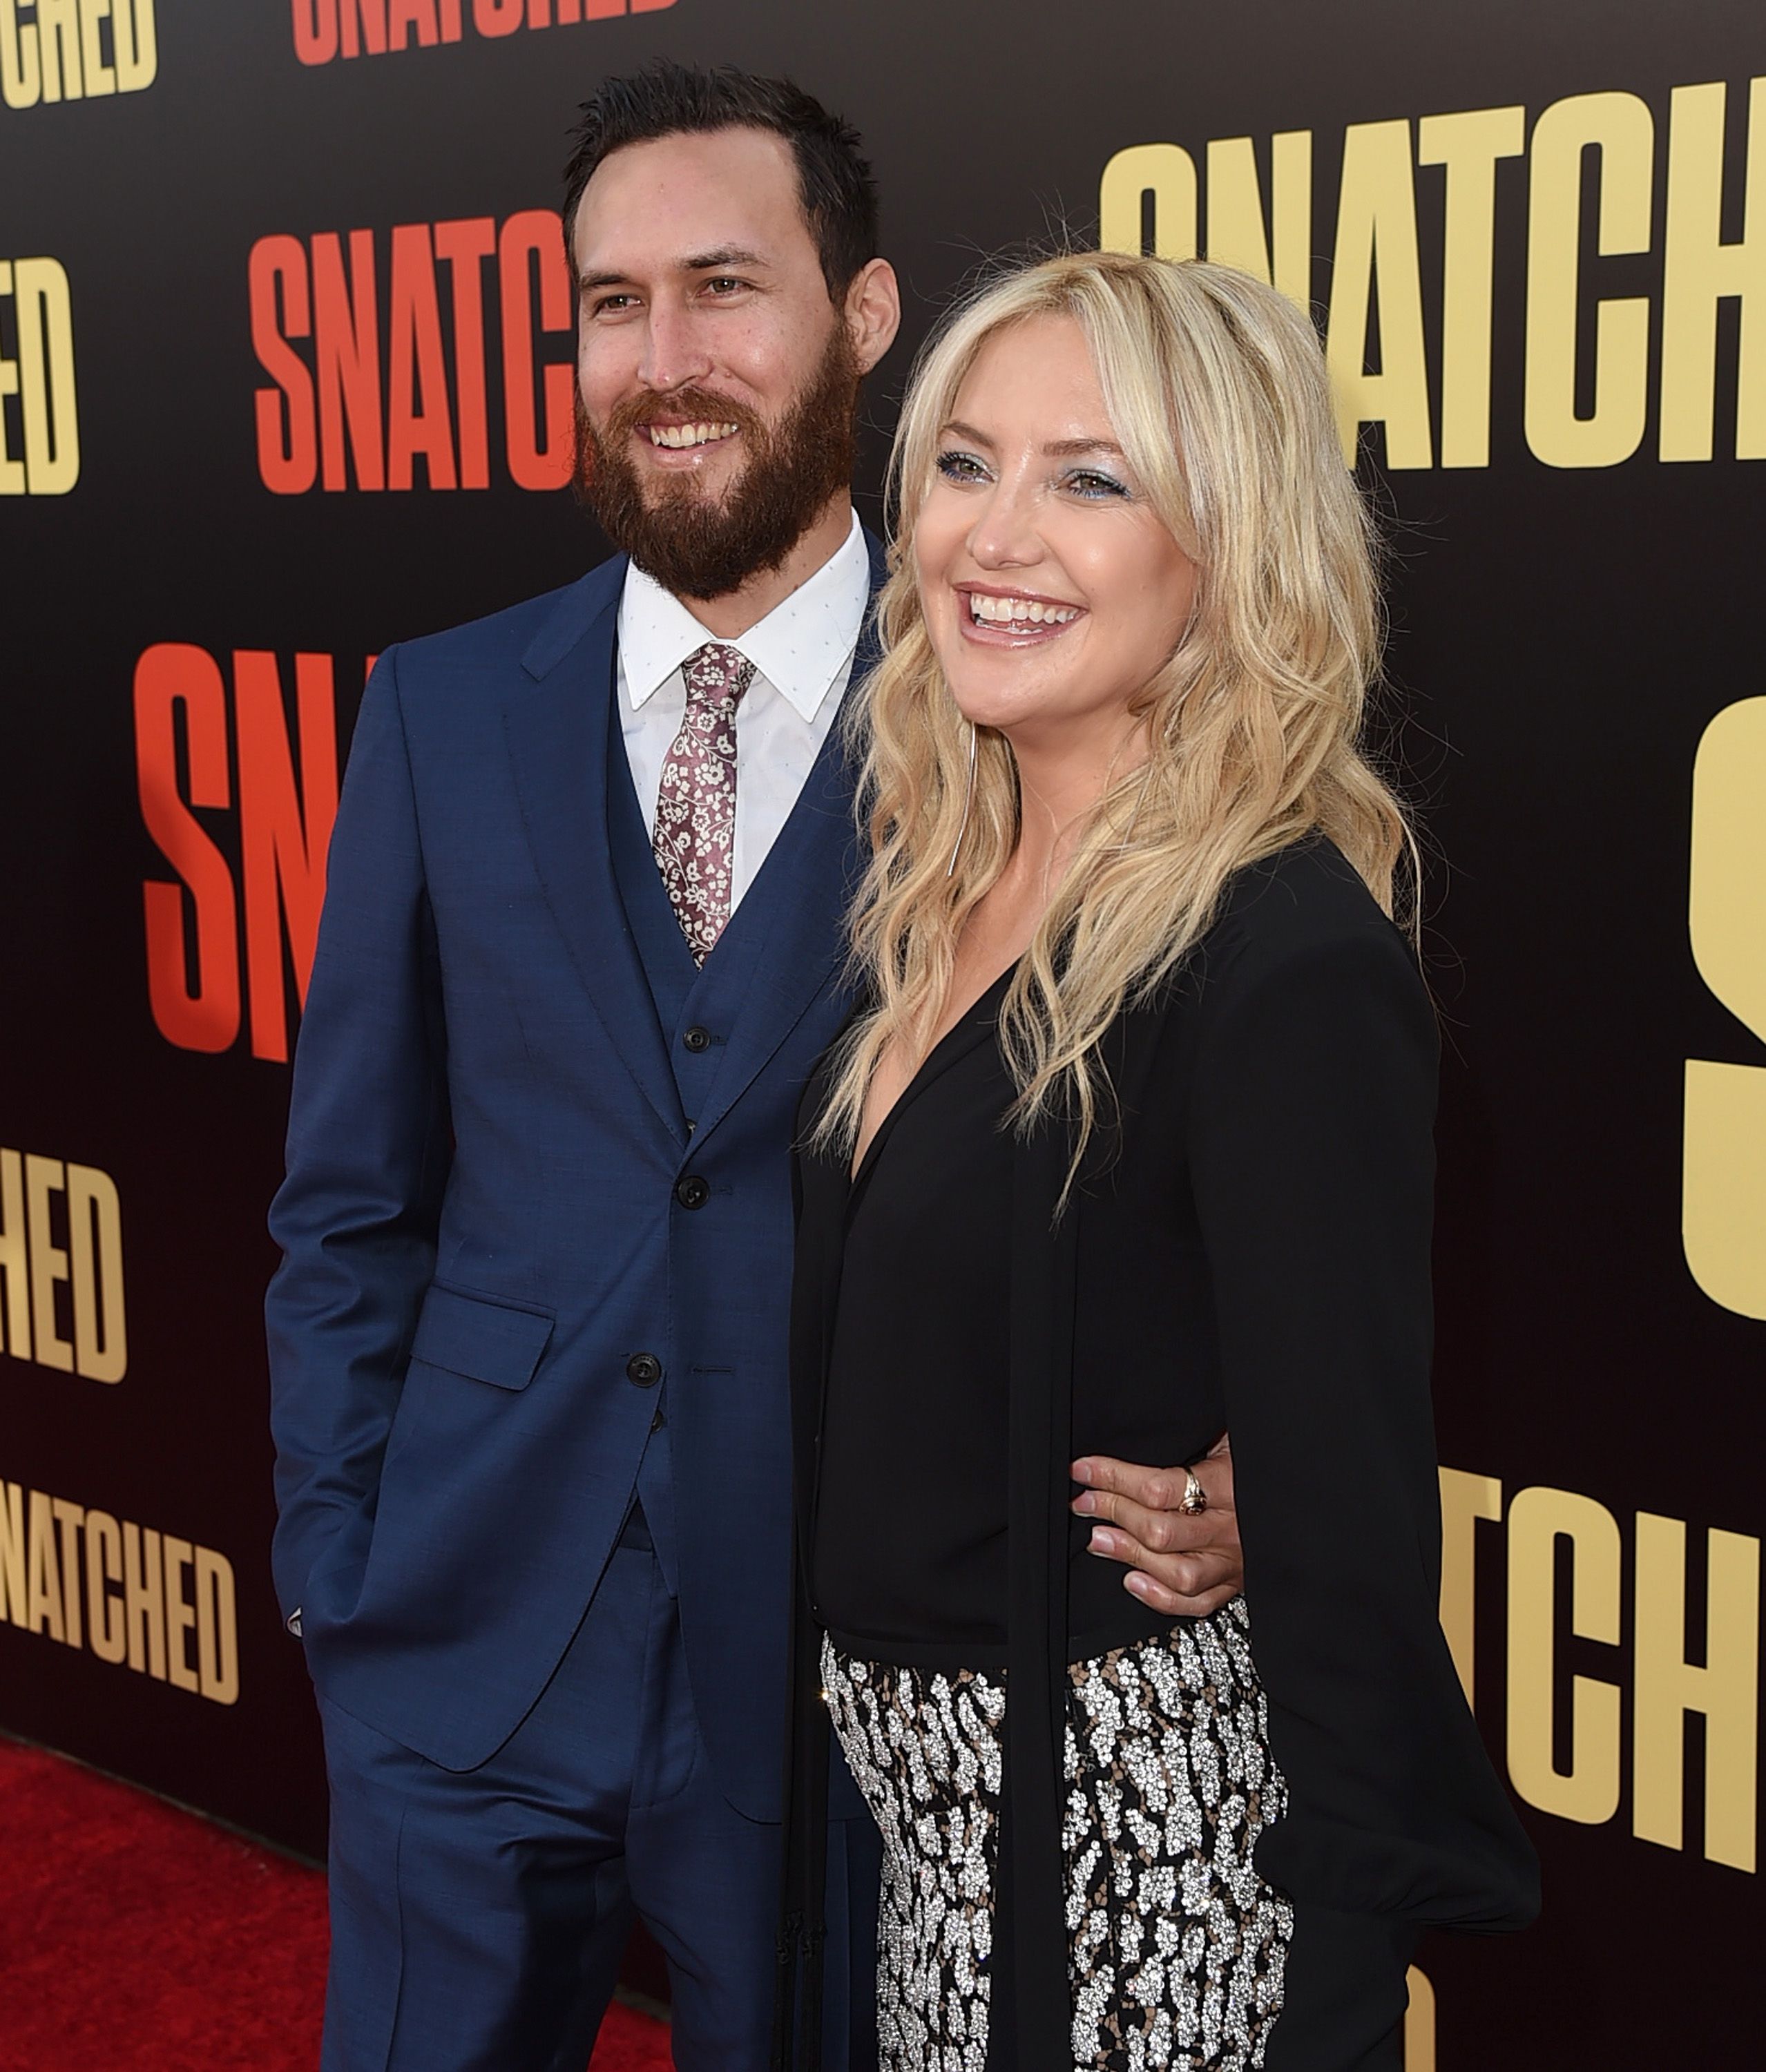 Danny Fujikawa and actor Kate Hudson at the premiere of "Snatched" at Regency Village Theatre on May 10, 2017, on Westwood, California | Photo: Getty Images